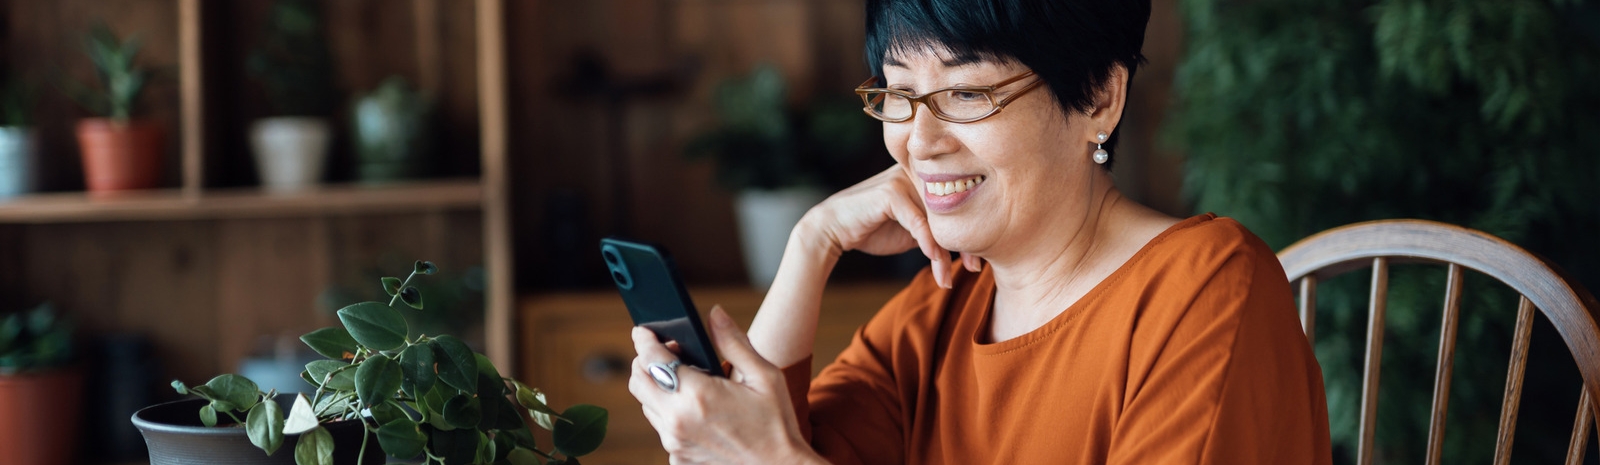 Woman smiling and looking at cell phone